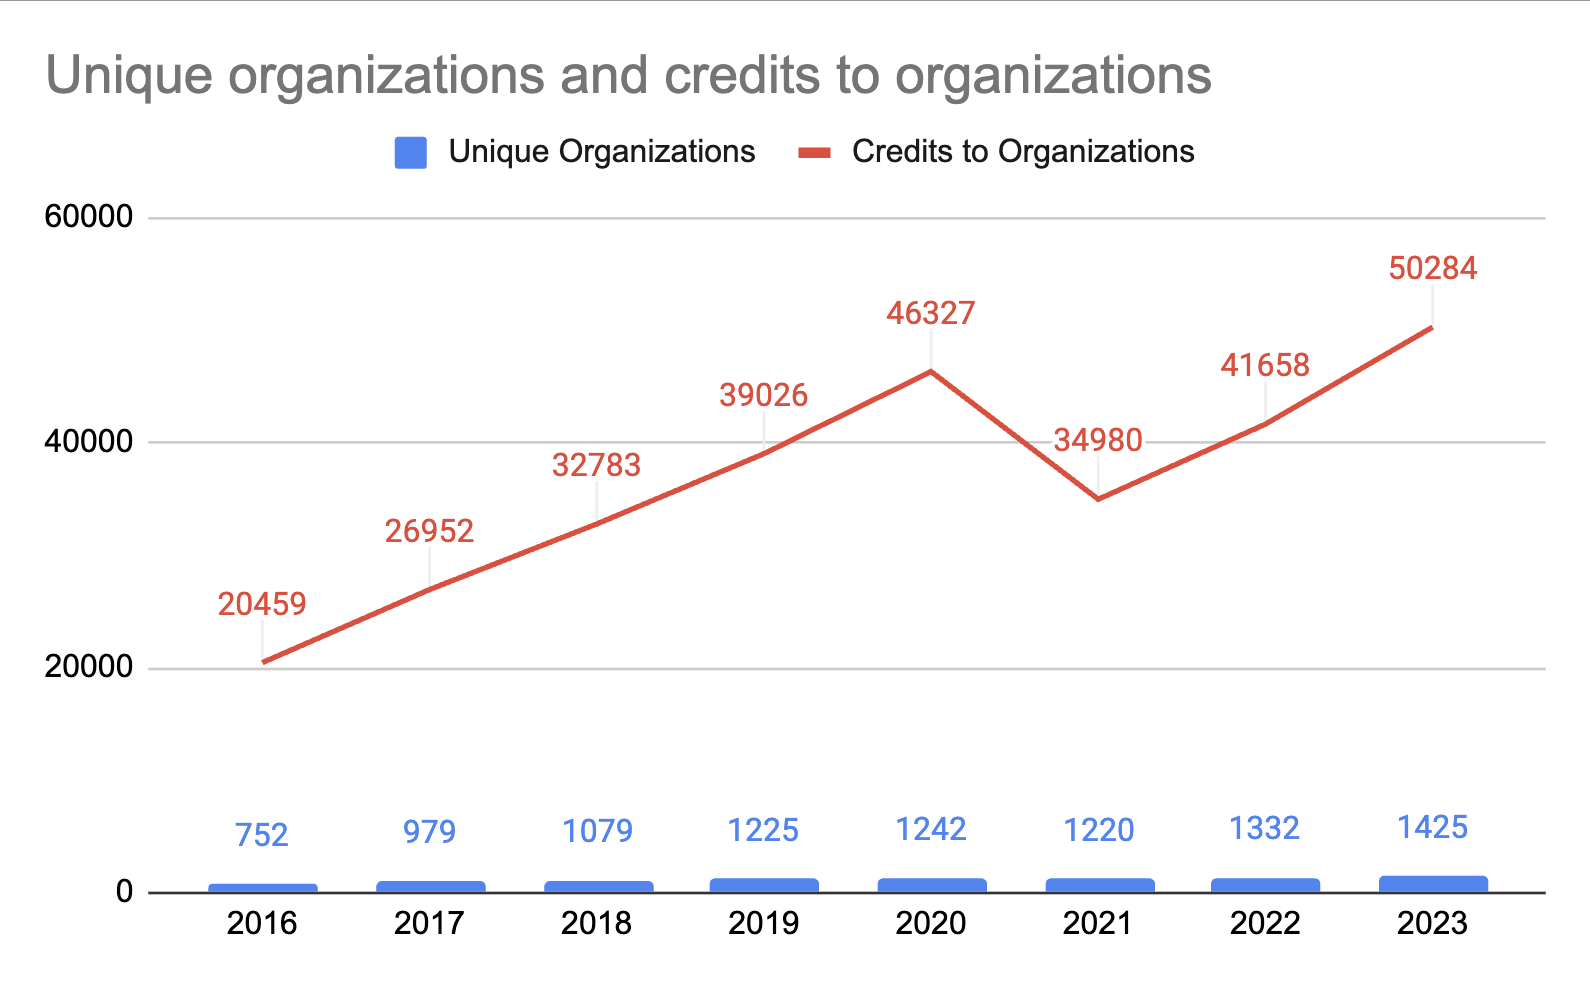 Unique organizational contributors and their credits year over year